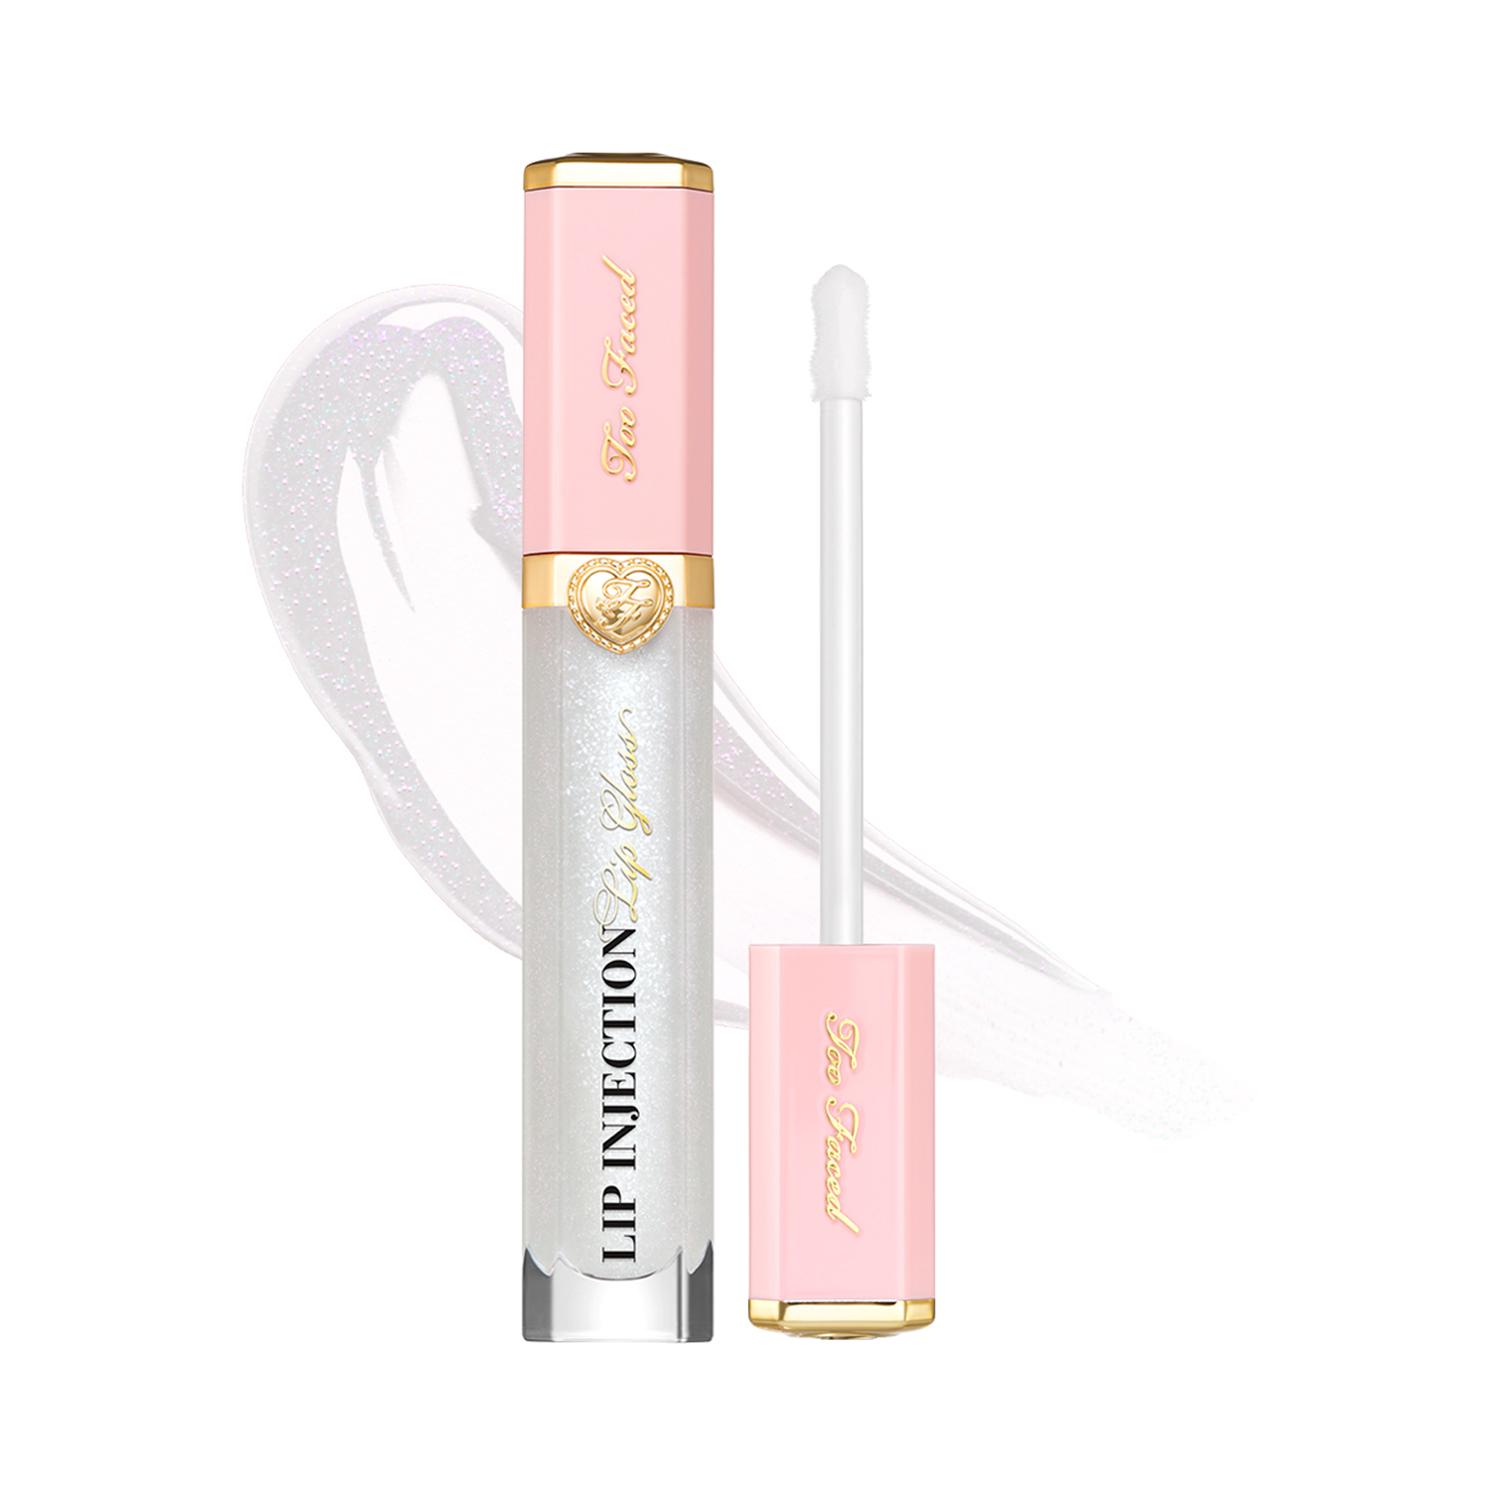 Too Faced | Too Faced Lip Injection Power Plumping Lip Gloss - Stars Are Aligned (7ml)